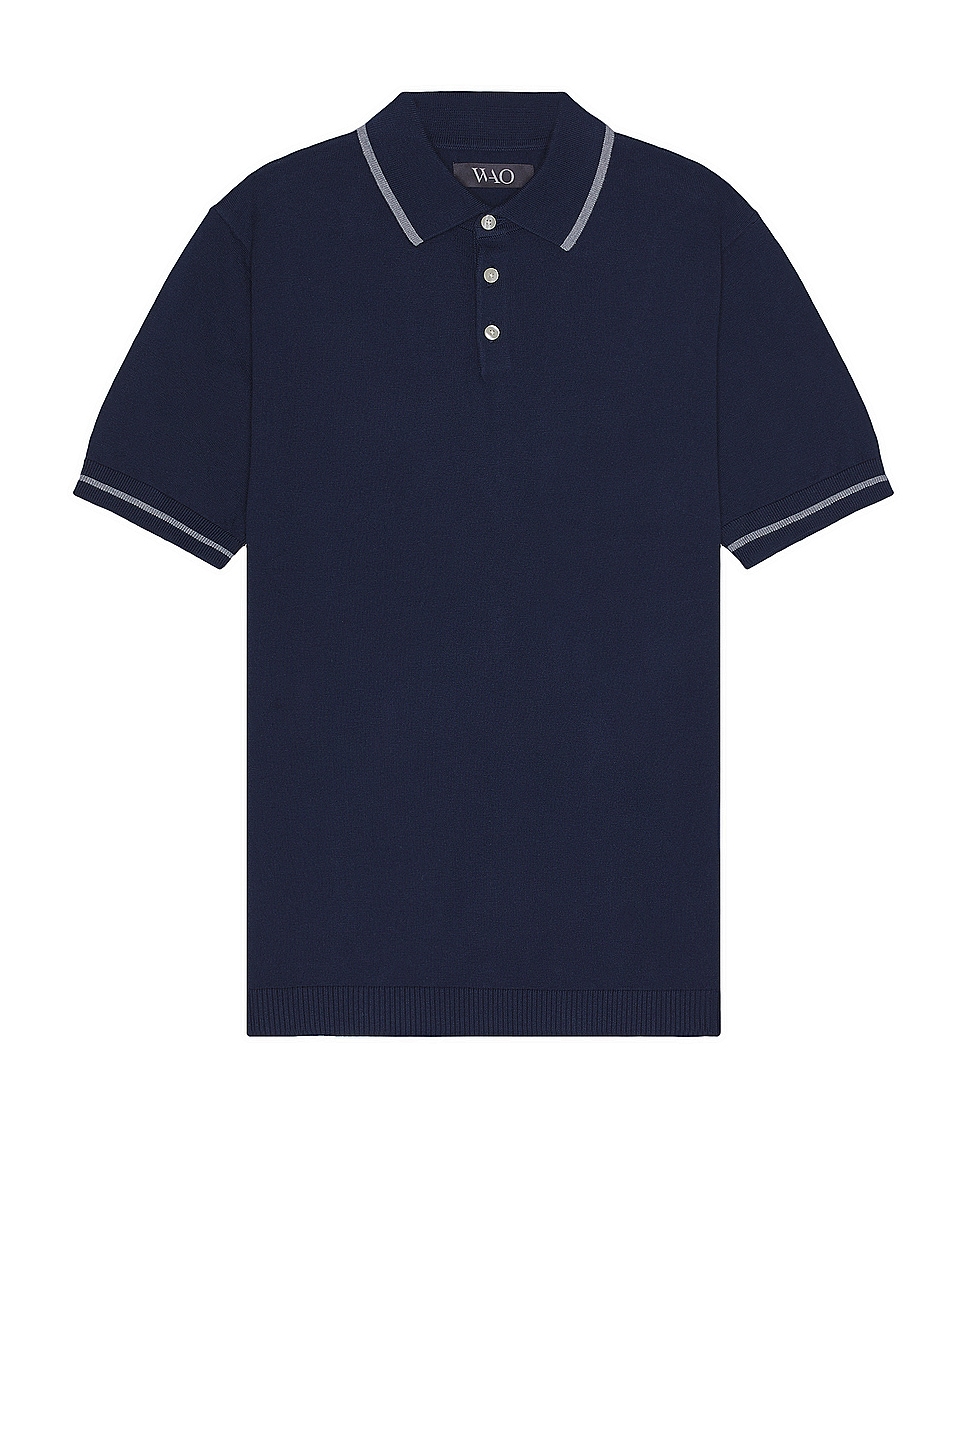 Image 1 of WAO Everyday Luxe Polo in Navy